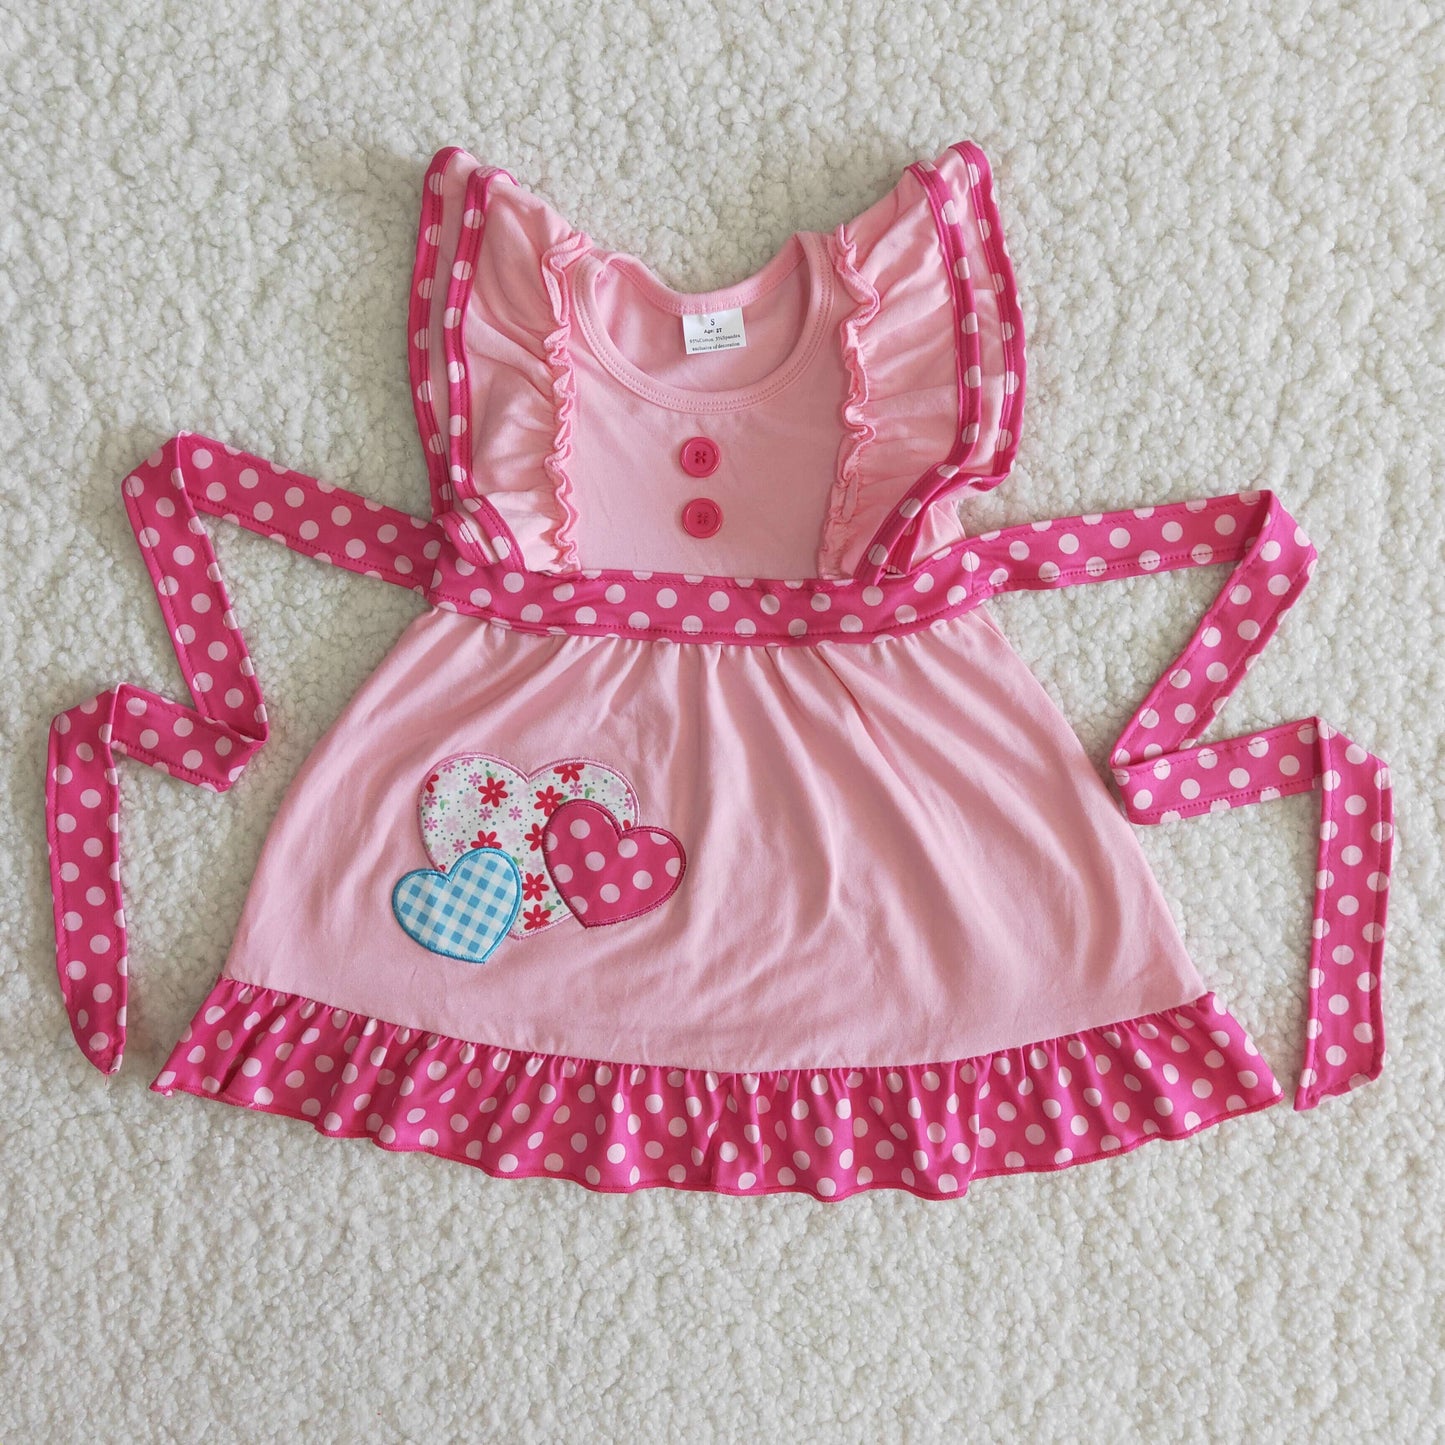 Baby girls Valentine's Day dress embroideried styles